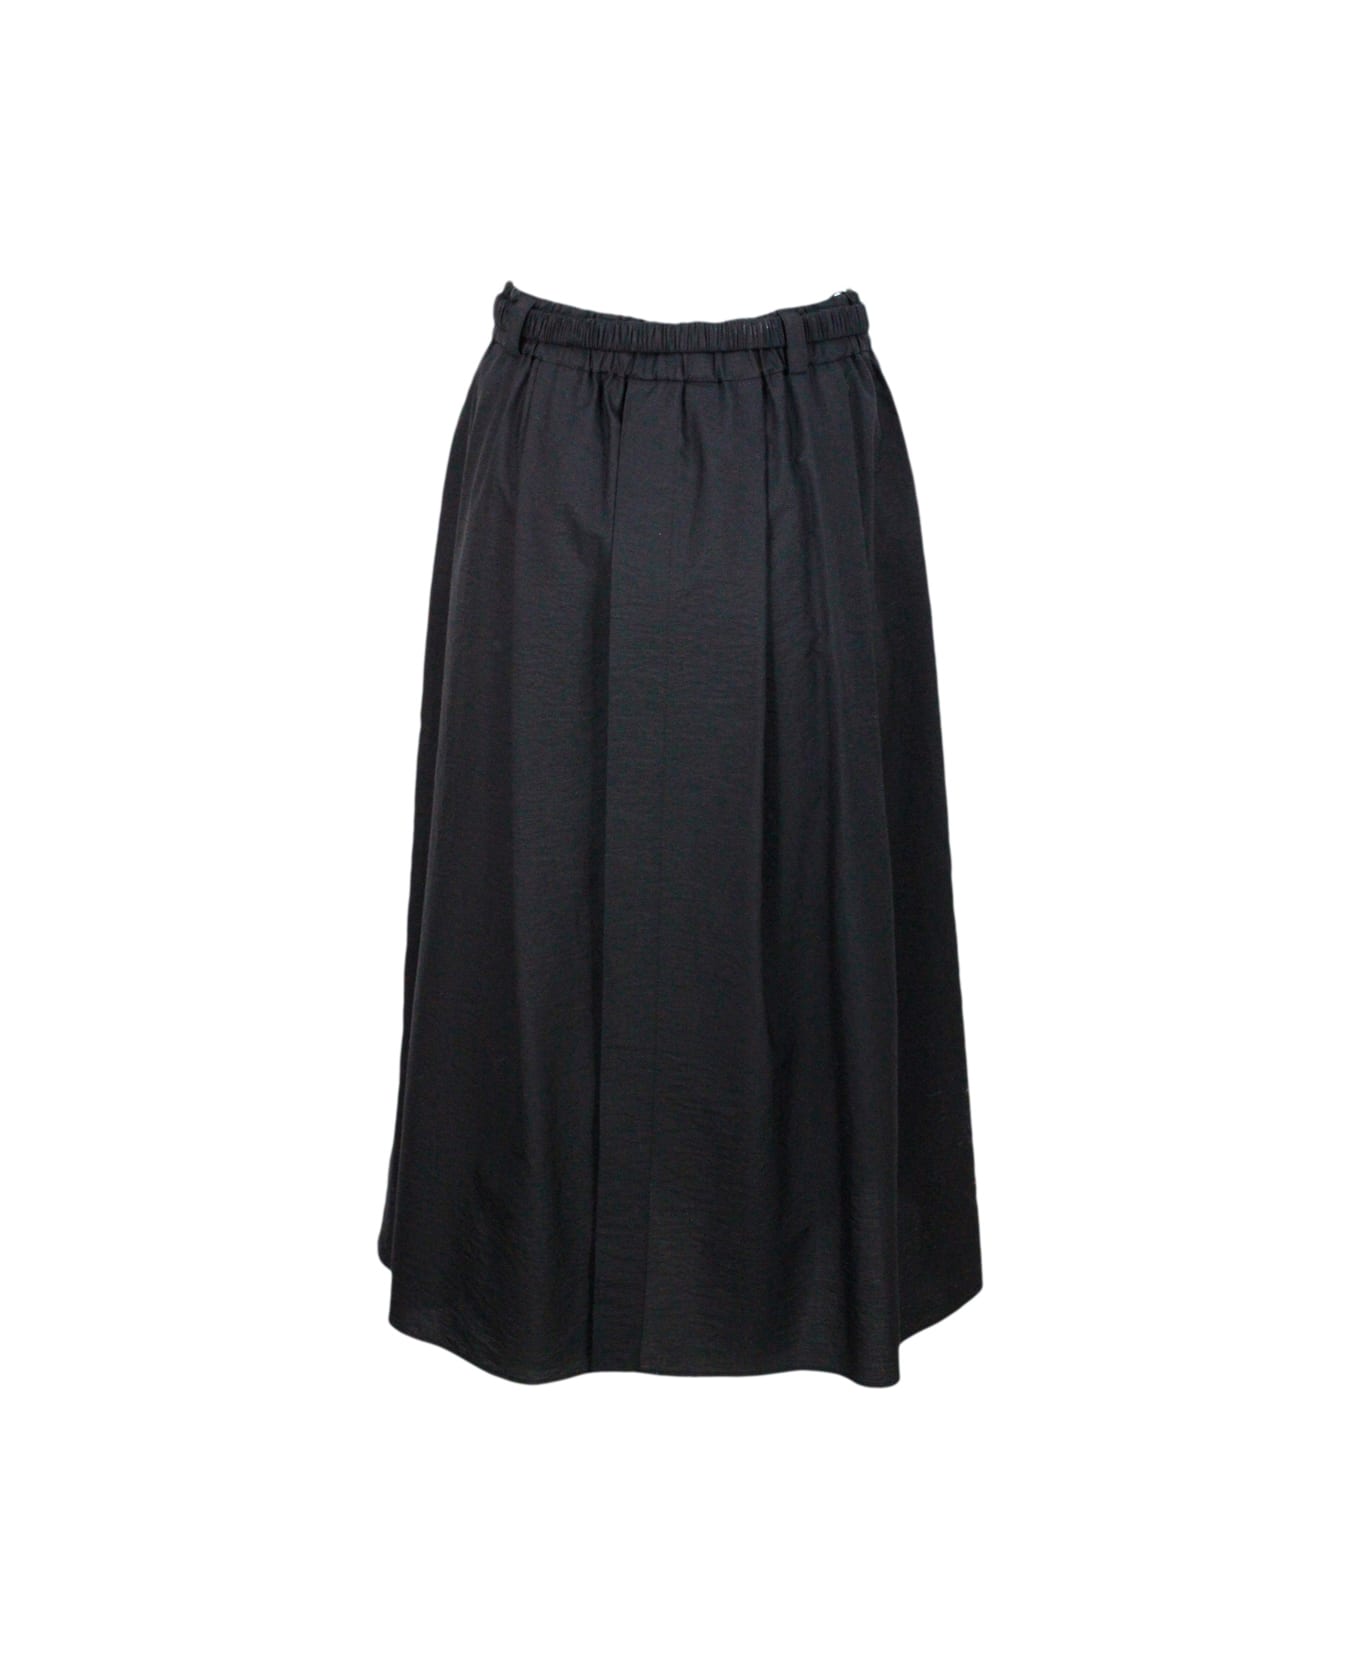 Brunello Cucinelli Skirt In Light Embossed Stretch Cotton With Small Pleats And Belt At The Waist - Nero